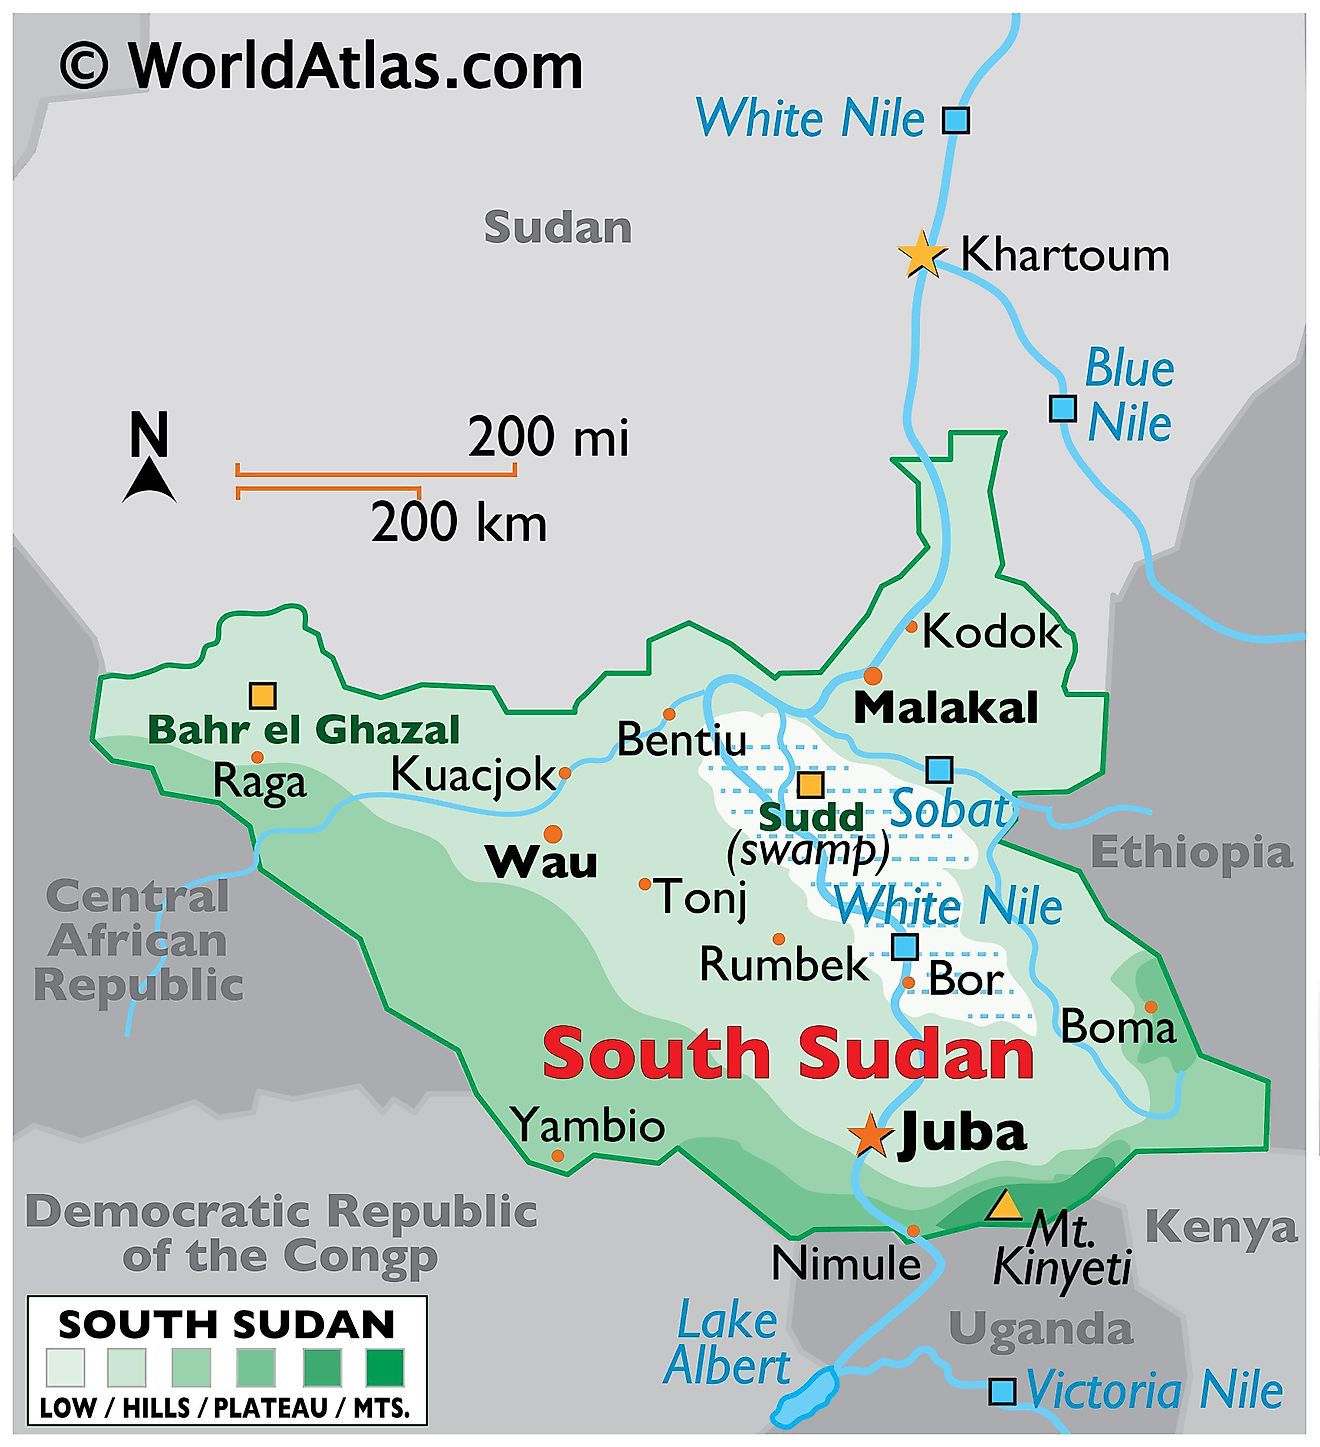 Physical Map of South Sudan with state boundaries. It exhibits South Sudan's major physical features like terrain, mountains, rivers, major and cities.